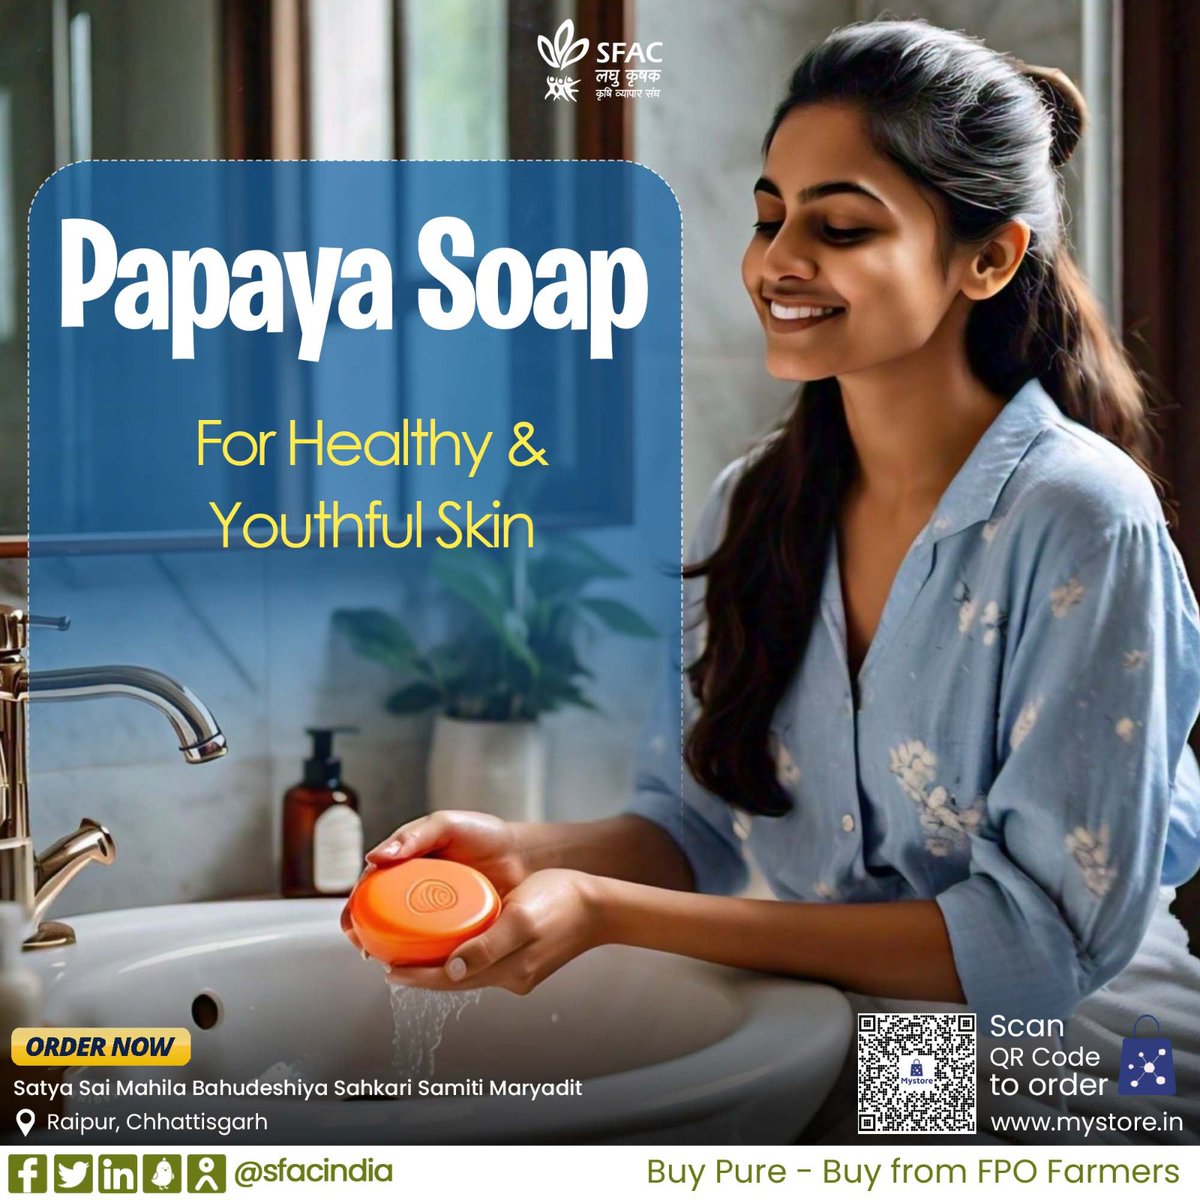 This natural soap made from pure papaya extract is rich in vitamins C & A, for a soft & glowing skin. Buy straight from FPO farmers👇 mystore.in/en/product/pap… 🧼🫧 @AgriGoI @MOFPI_GOI @MinOfCooperatn @jagograhakjago @ONDC_Official @PIB_India @mygovindia #VocalForLocal #healthy